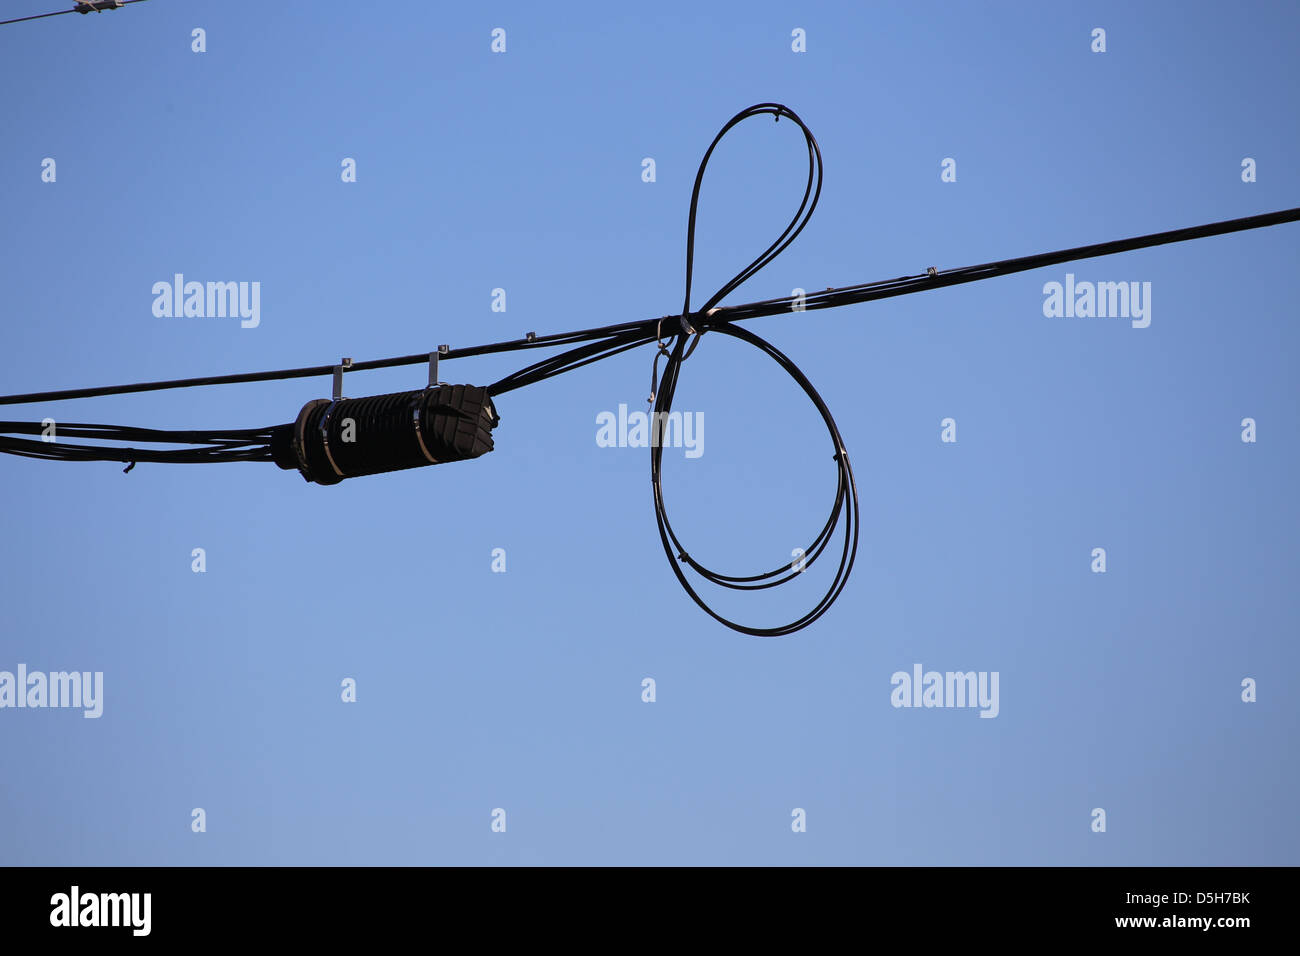 A telephone internet or communications cable or fiber optic cables and junction box on a power line Stock Photo